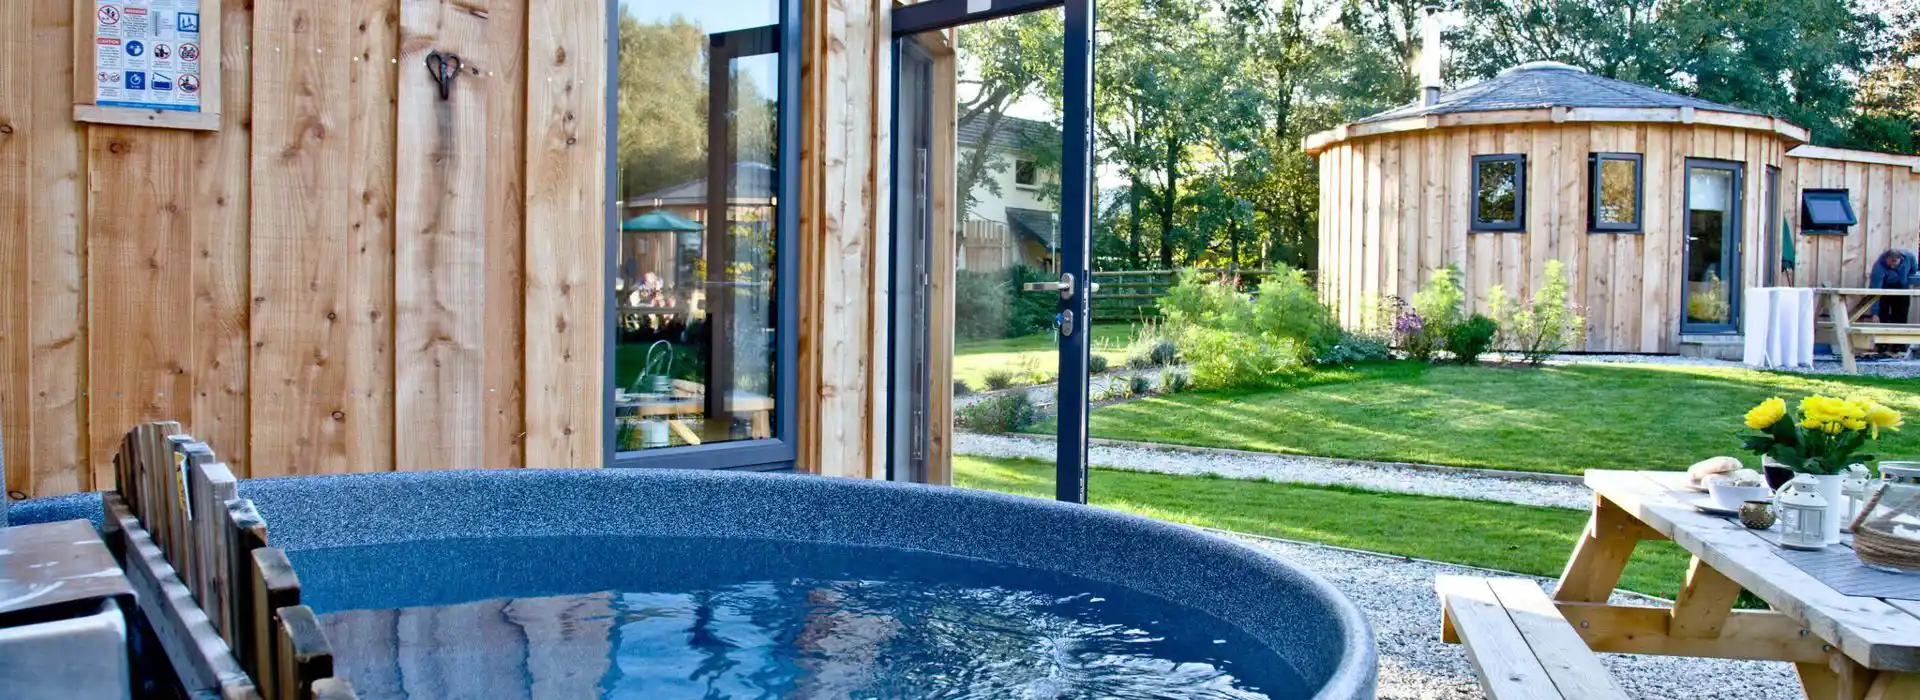 Best glamping spas in the UK